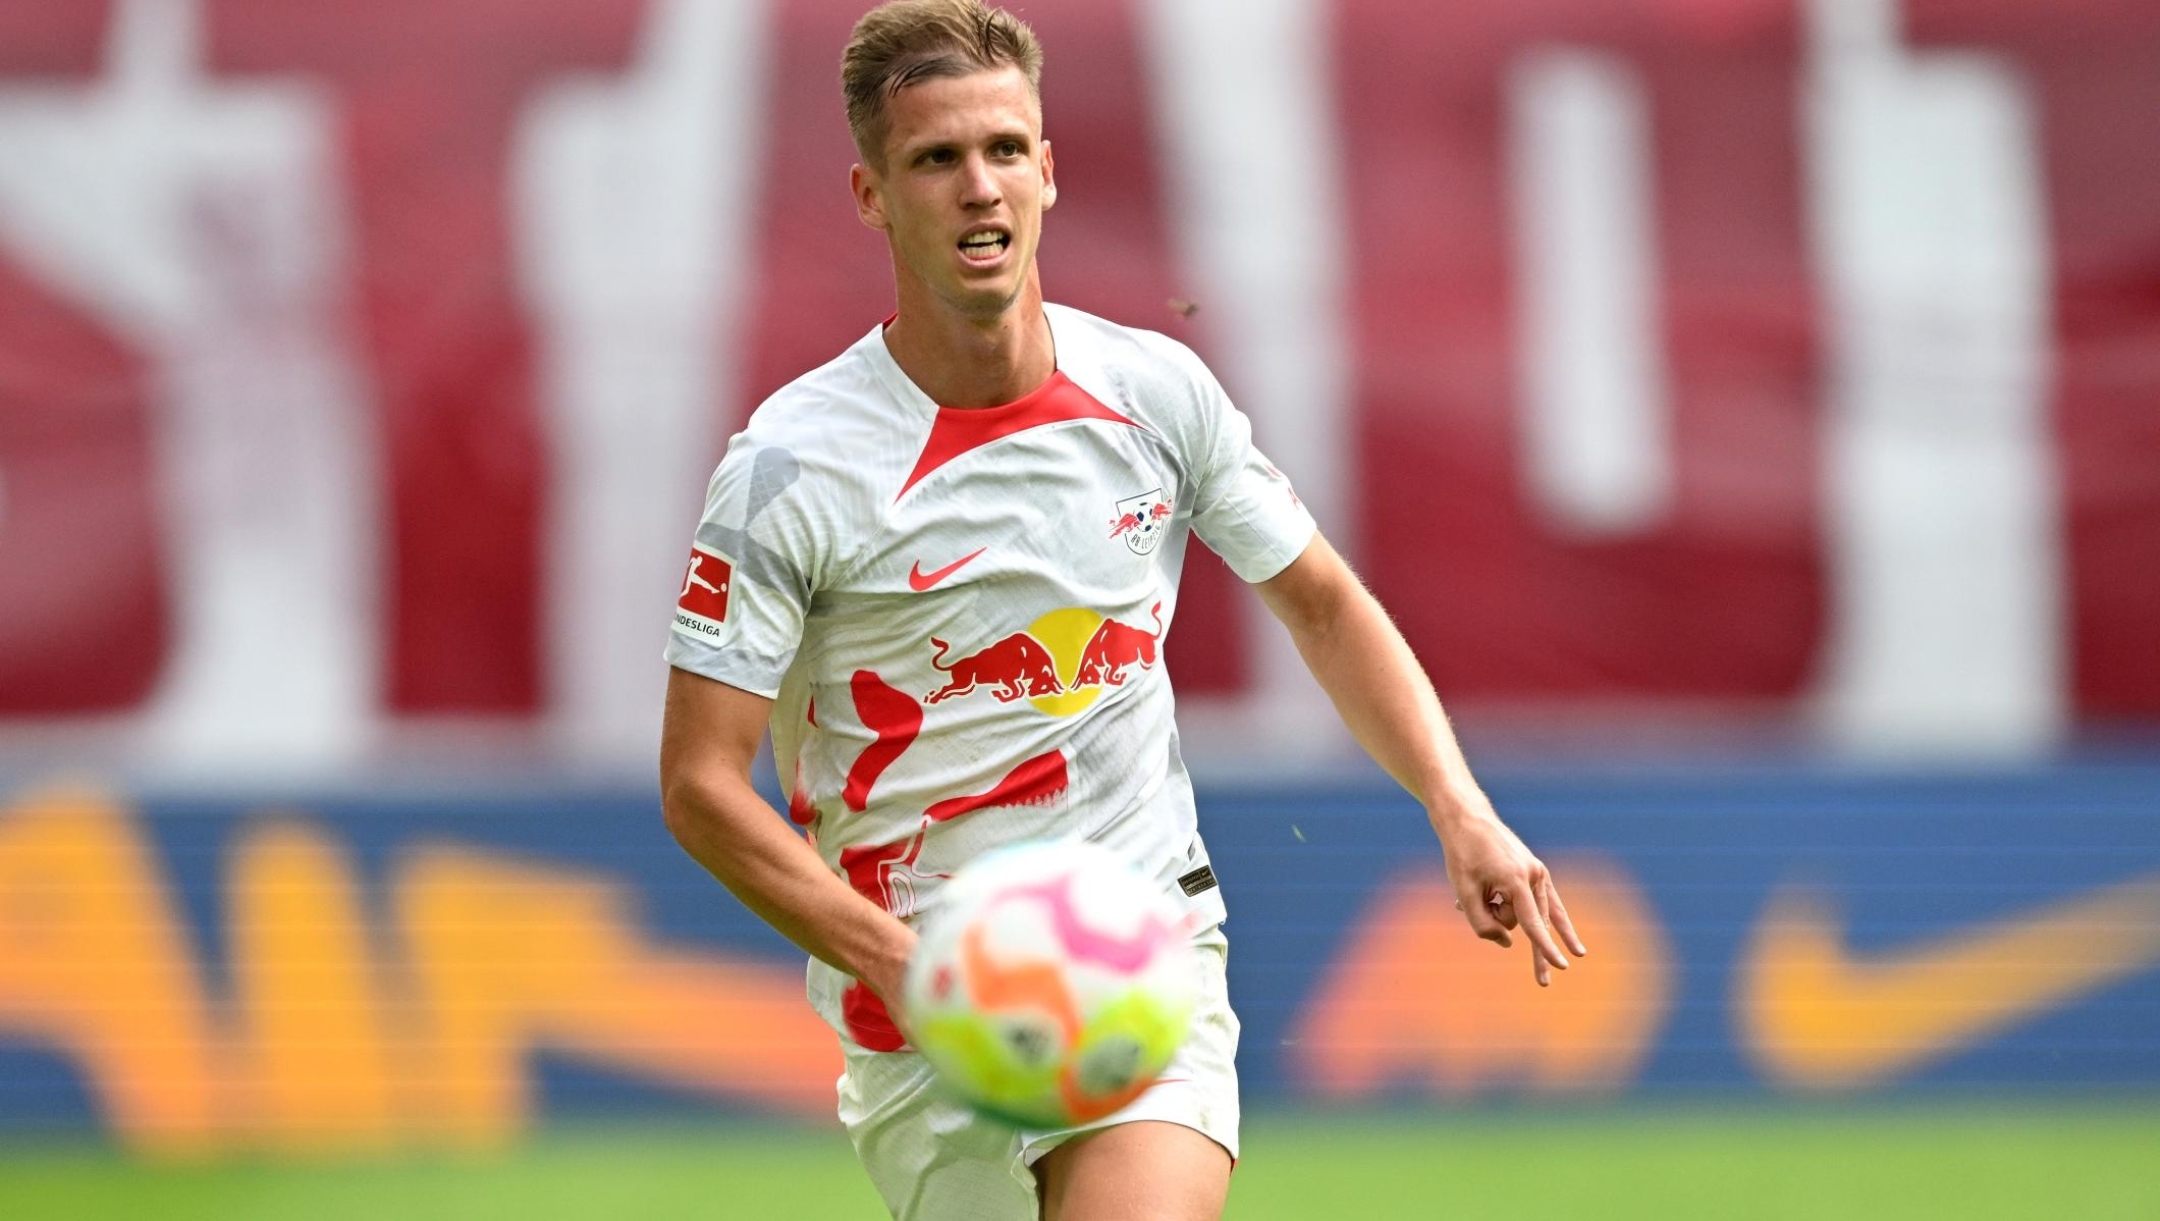 LEIPZIG, GERMANY - AUGUST 13: Dani Olmo of Leipzig in action during the Bundesliga match between RB Leipzig and 1. FC Köln at Red Bull Arena on August 13, 2022 in Leipzig, Germany. (Photo by Stuart Franklin/Getty Images)